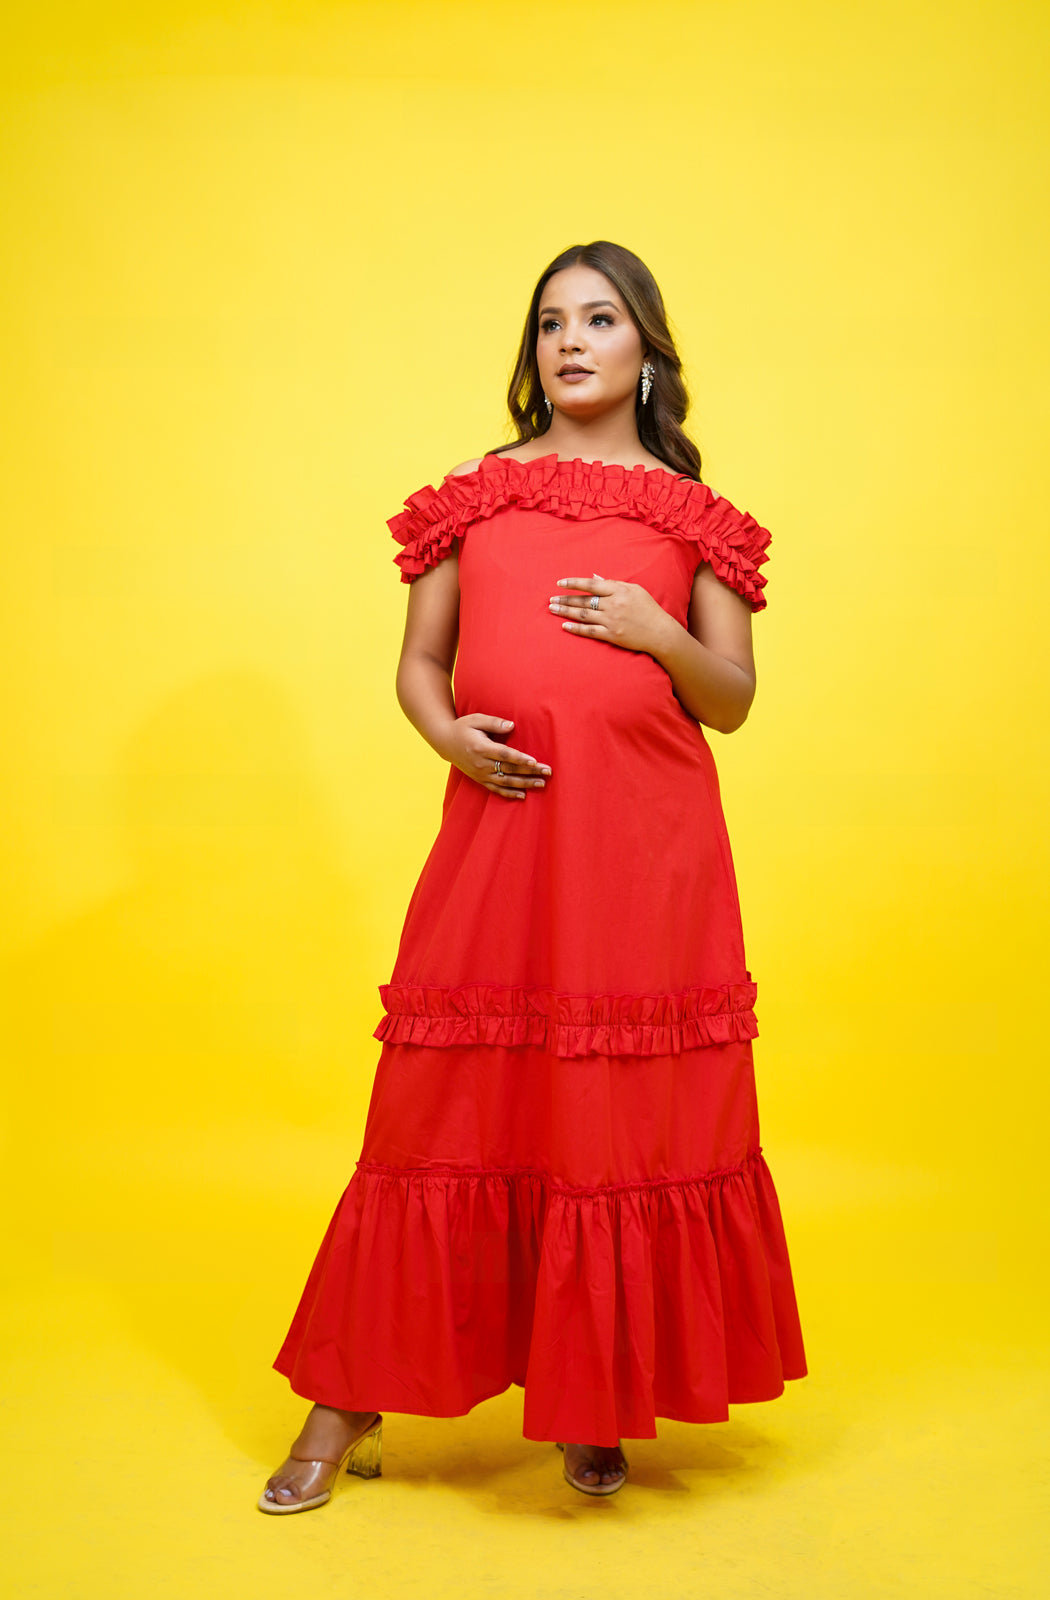 Cherry on the Cake Red Cotton Womens Nursing Maternity Dress with Hidden Nursing Features